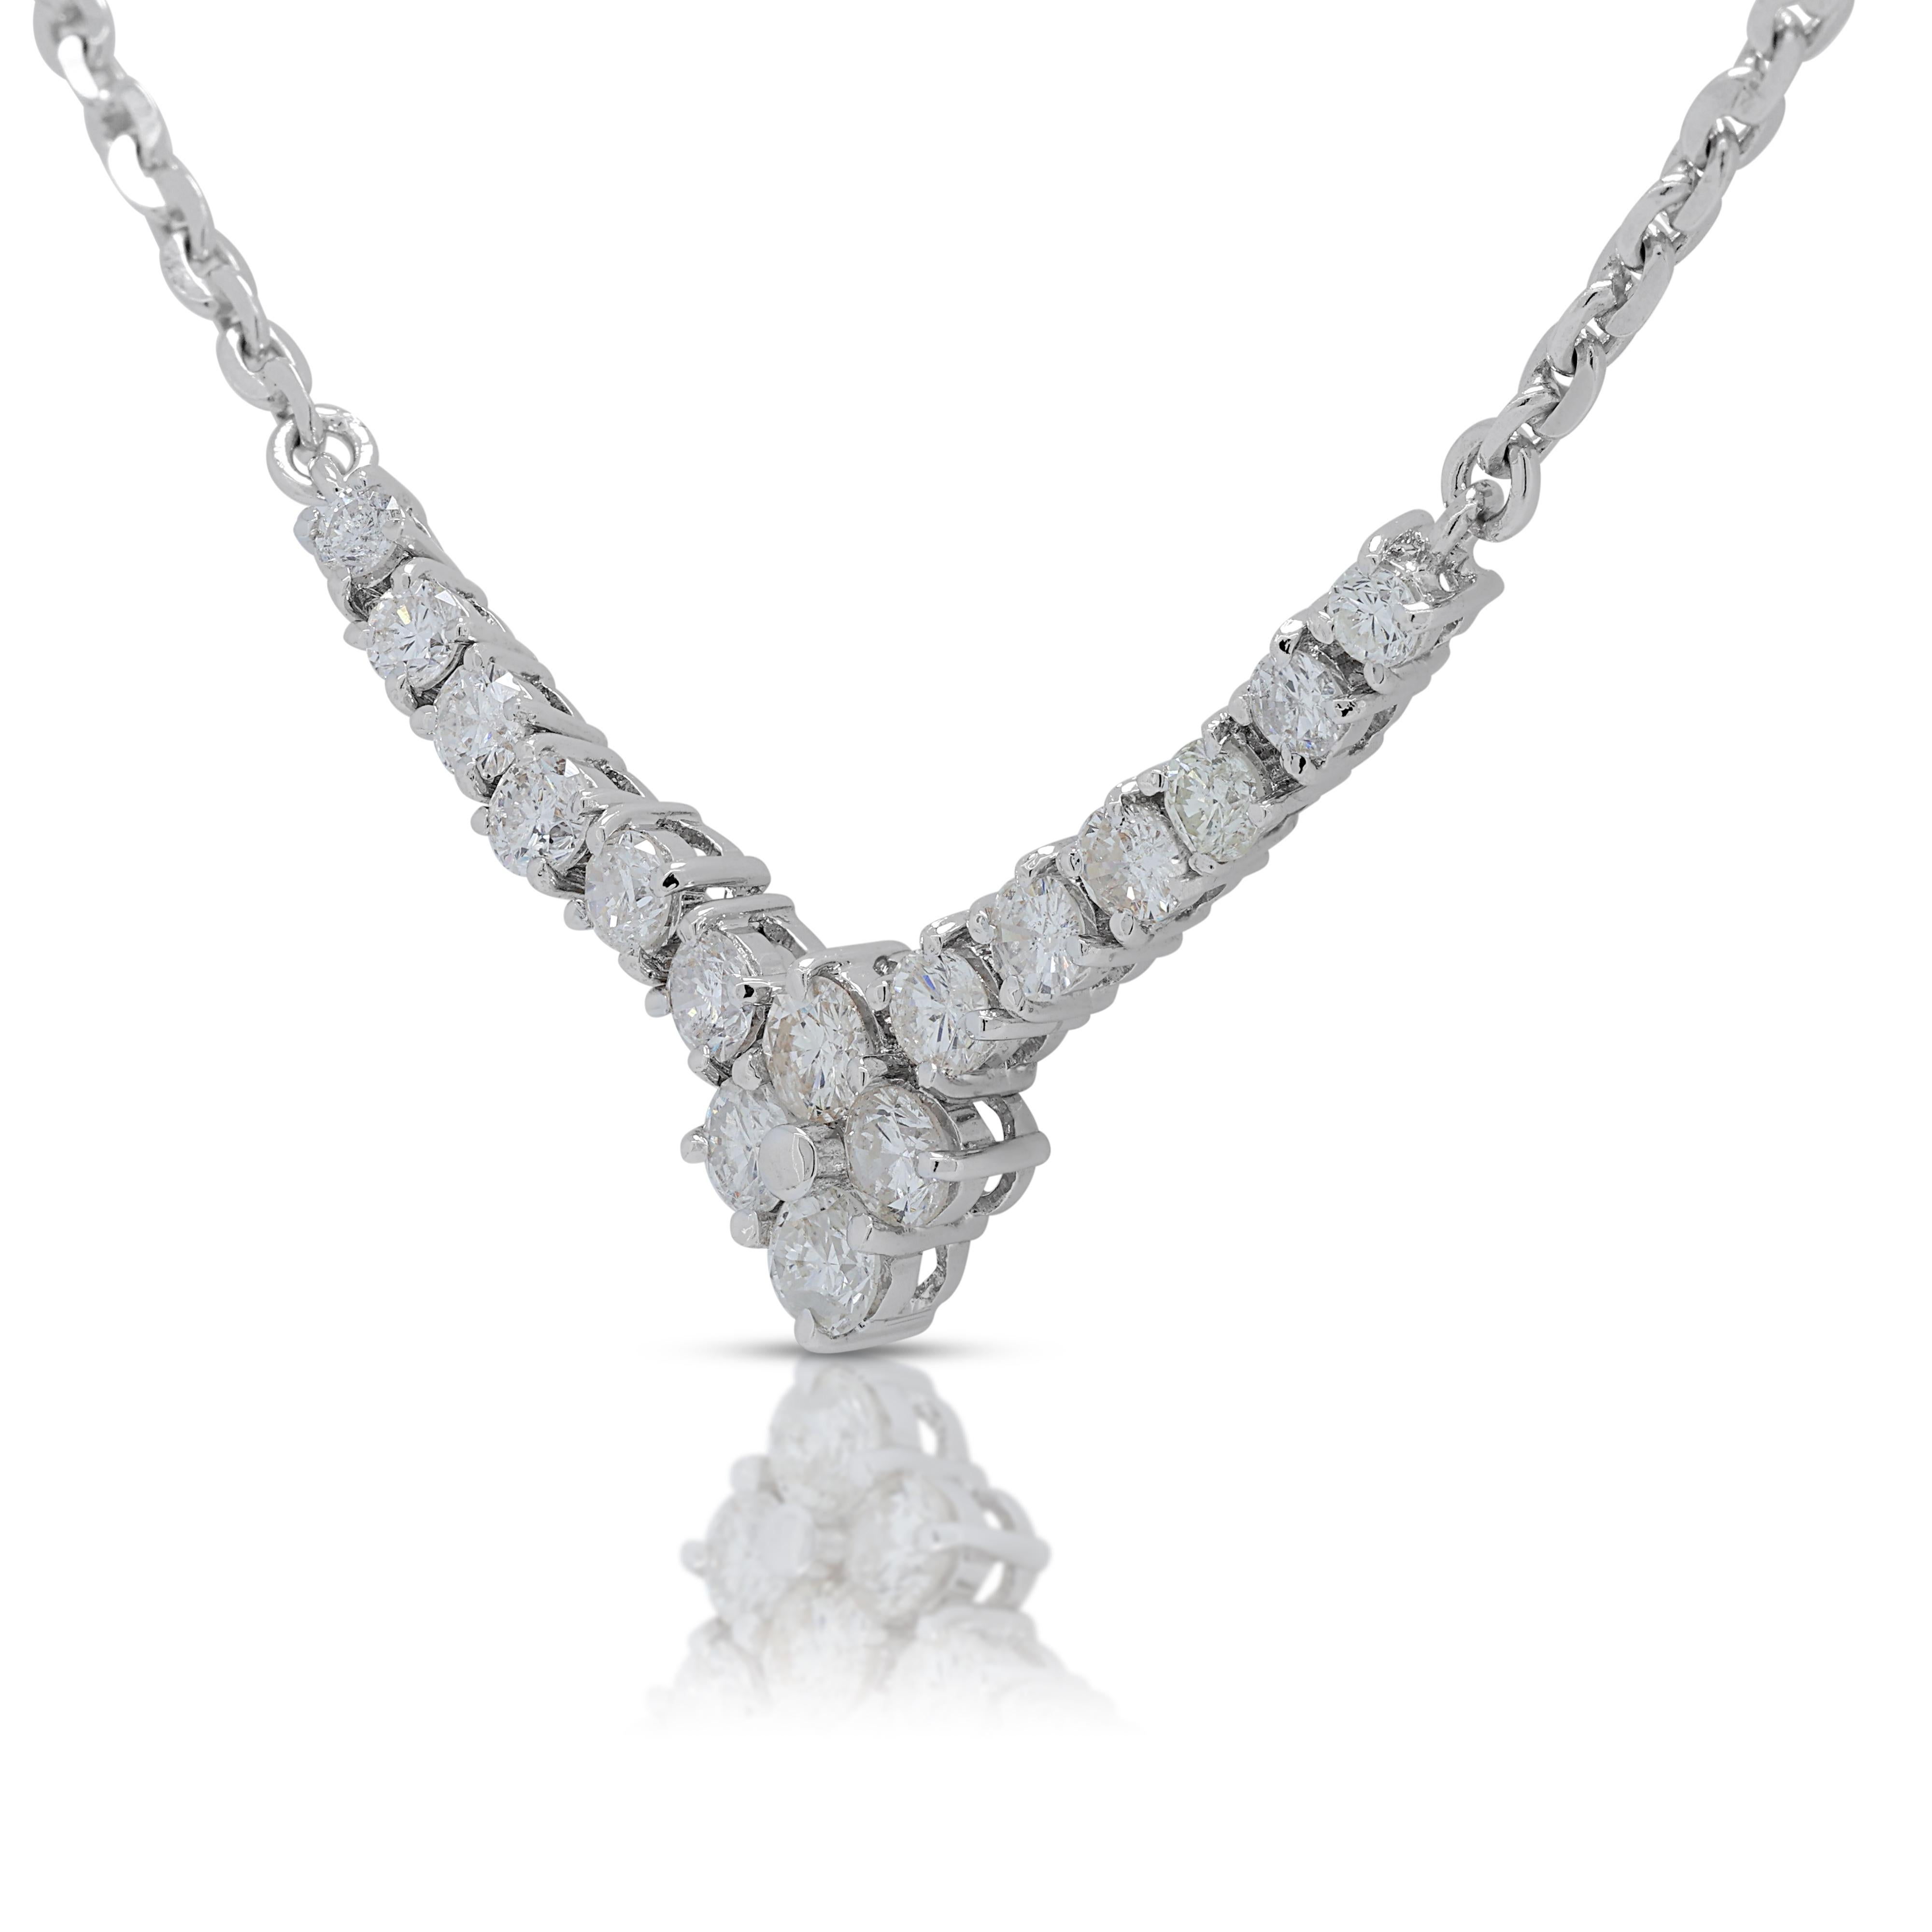 Exquisite 1.0ct Diamonds Necklace in 18K White Gold  In Excellent Condition For Sale In רמת גן, IL